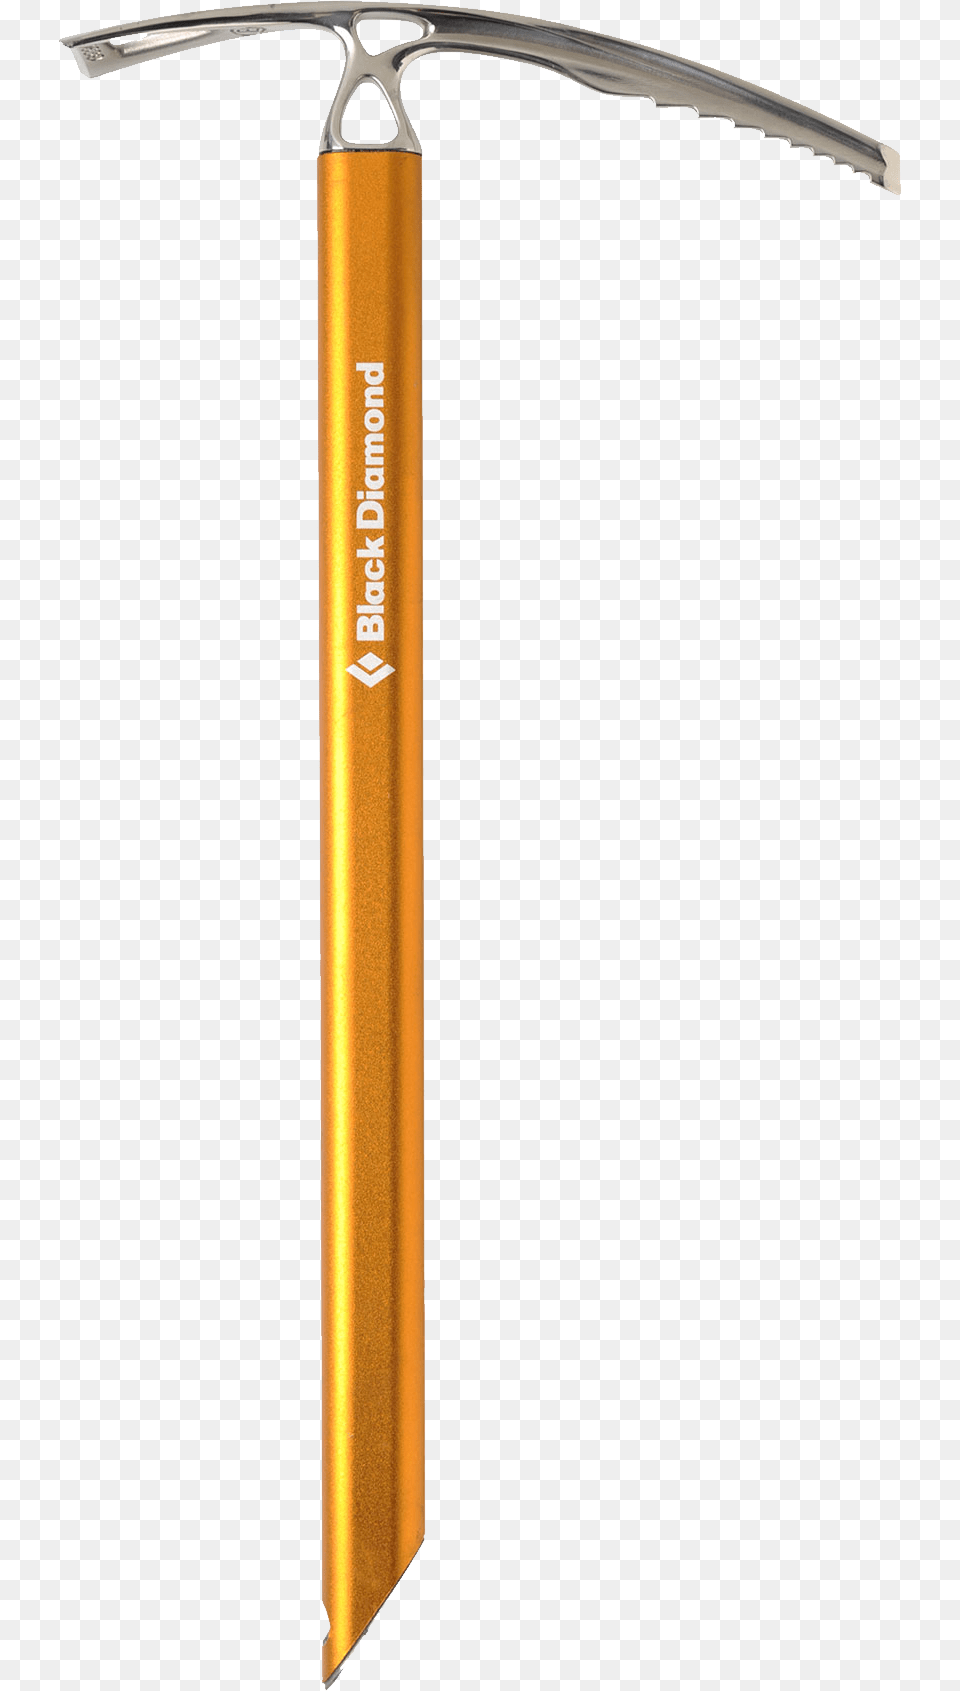 Ice Axe, Device, Hoe, Tool, Smoke Pipe Png Image